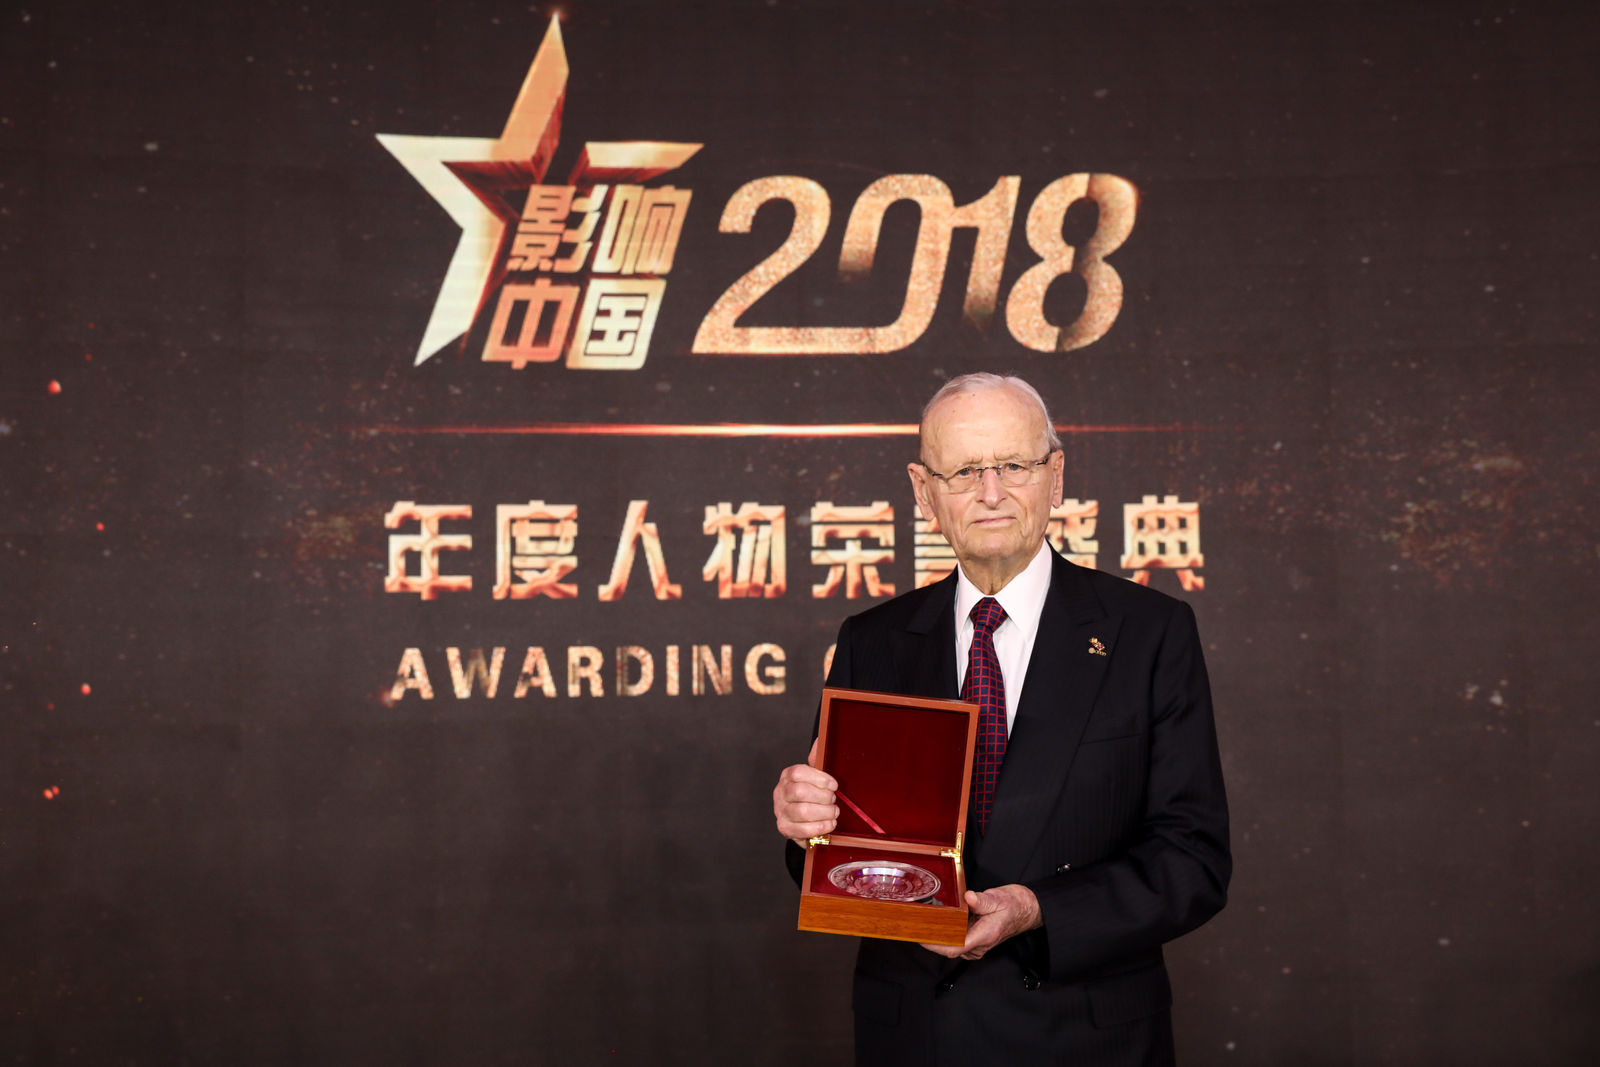 “Person of the Year 2018” – honor in China for former Volkswagen Chairman Prof. Dr. Carl Hahn